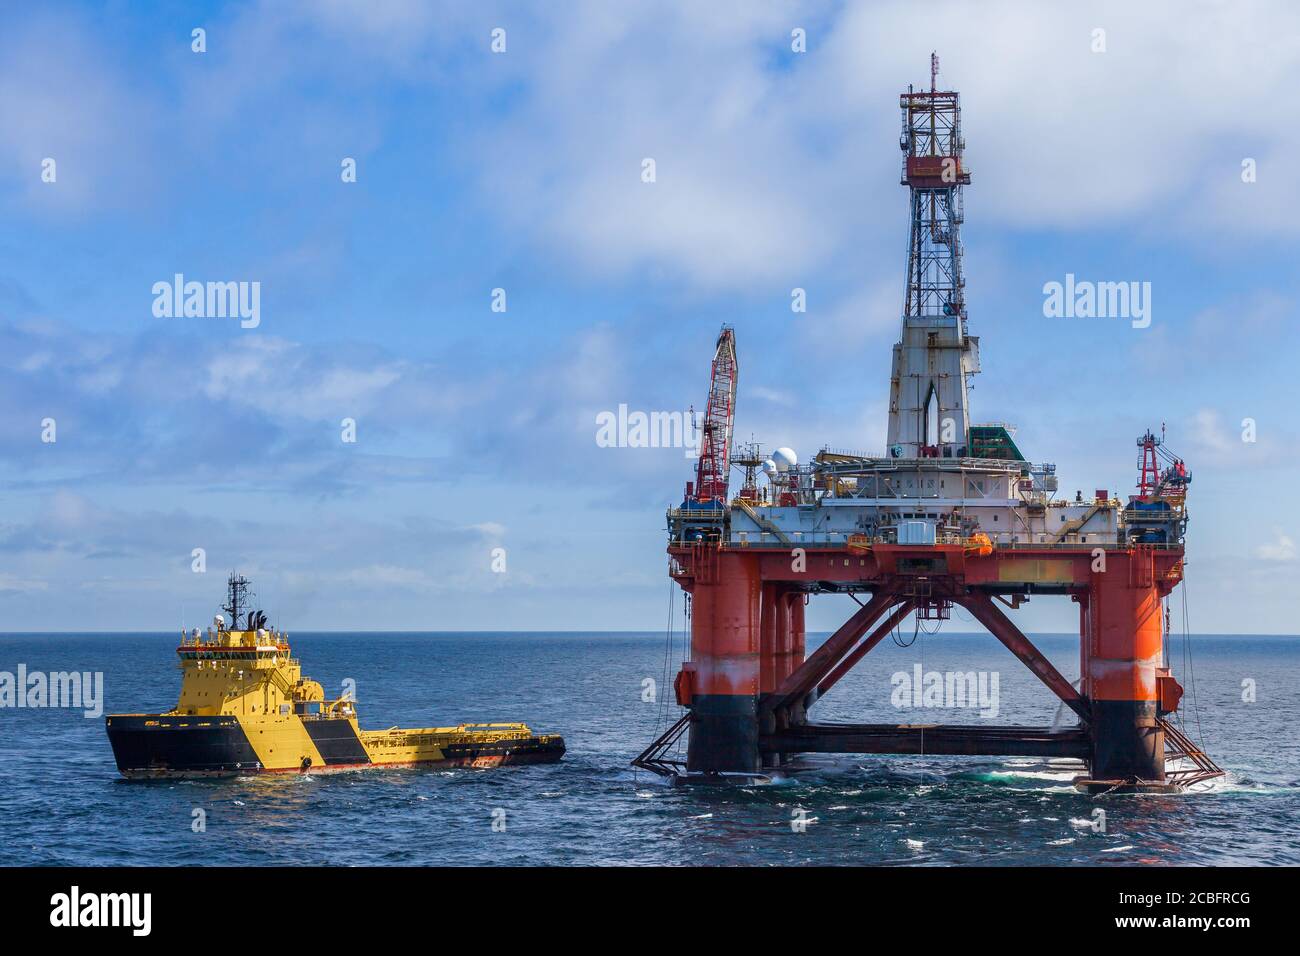 NORTH SEA NORWAY - 2015 MAY 25. The semi-submersible drilling rig Transocean Leader with anchor handler vessel Balder Viking alongside. Stock Photo